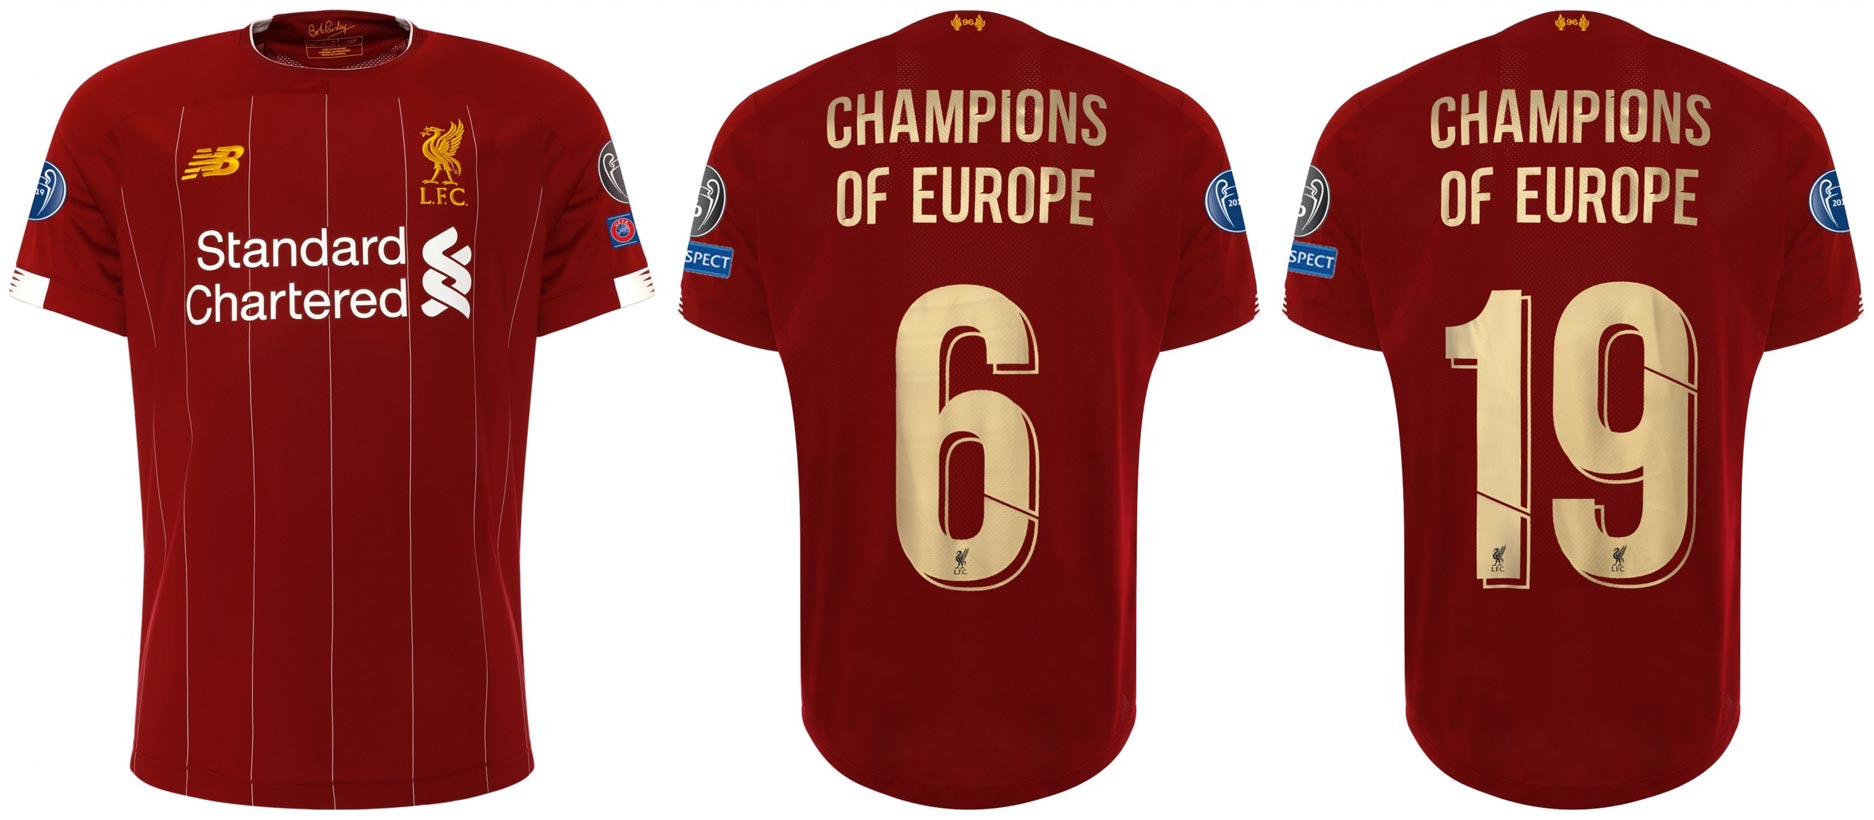 champions of europe liverpool jersey